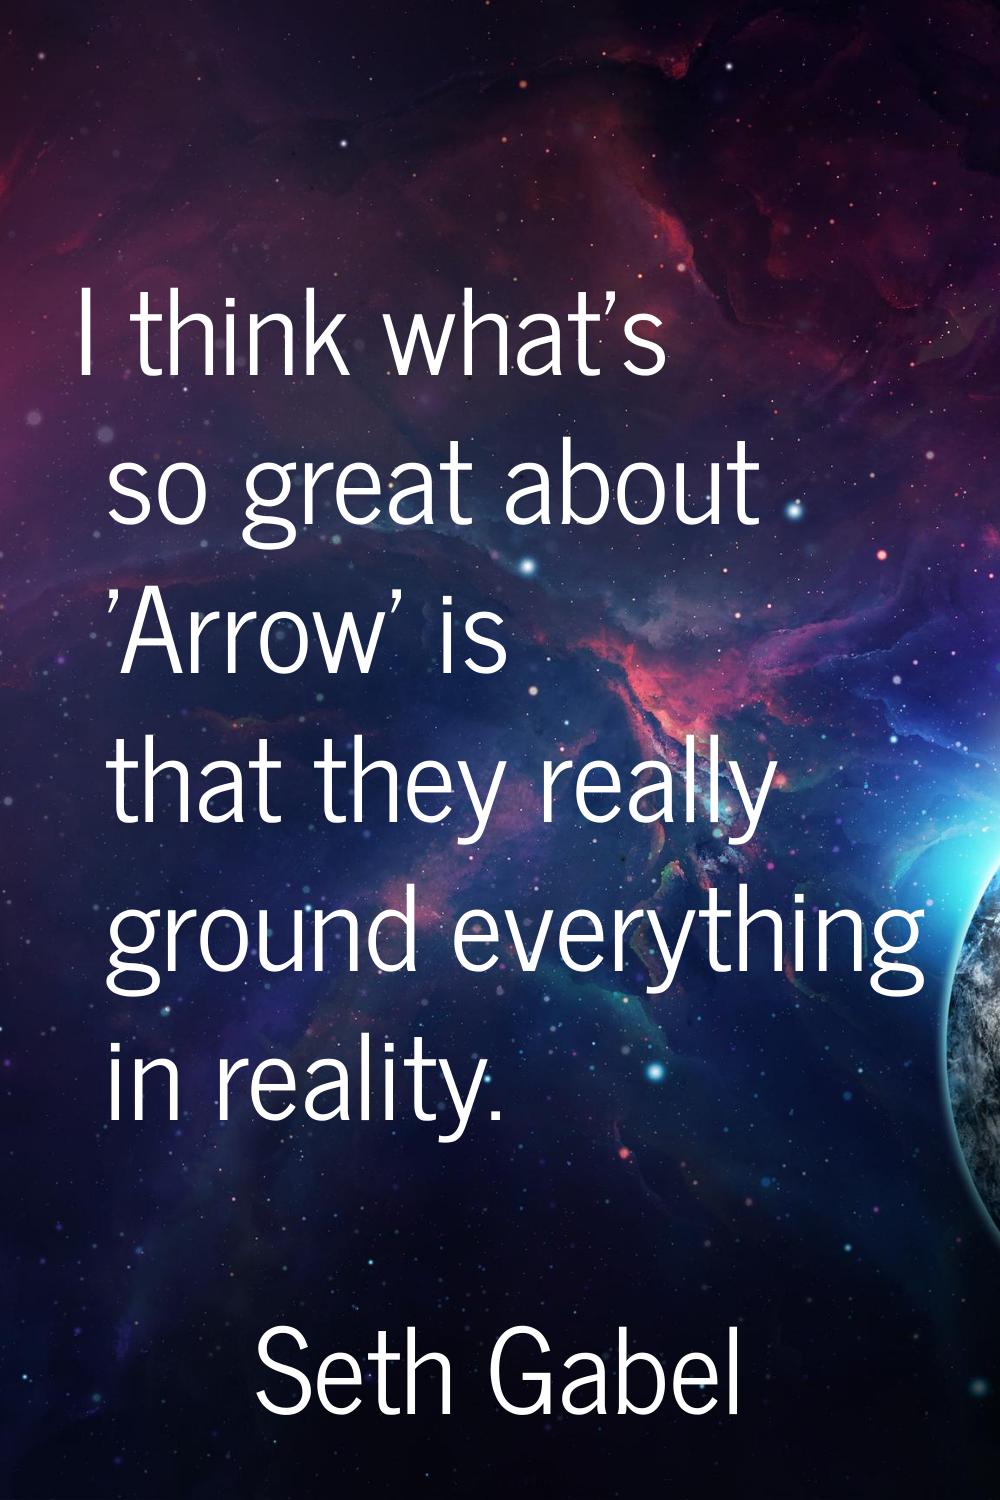 I think what's so great about 'Arrow' is that they really ground everything in reality.